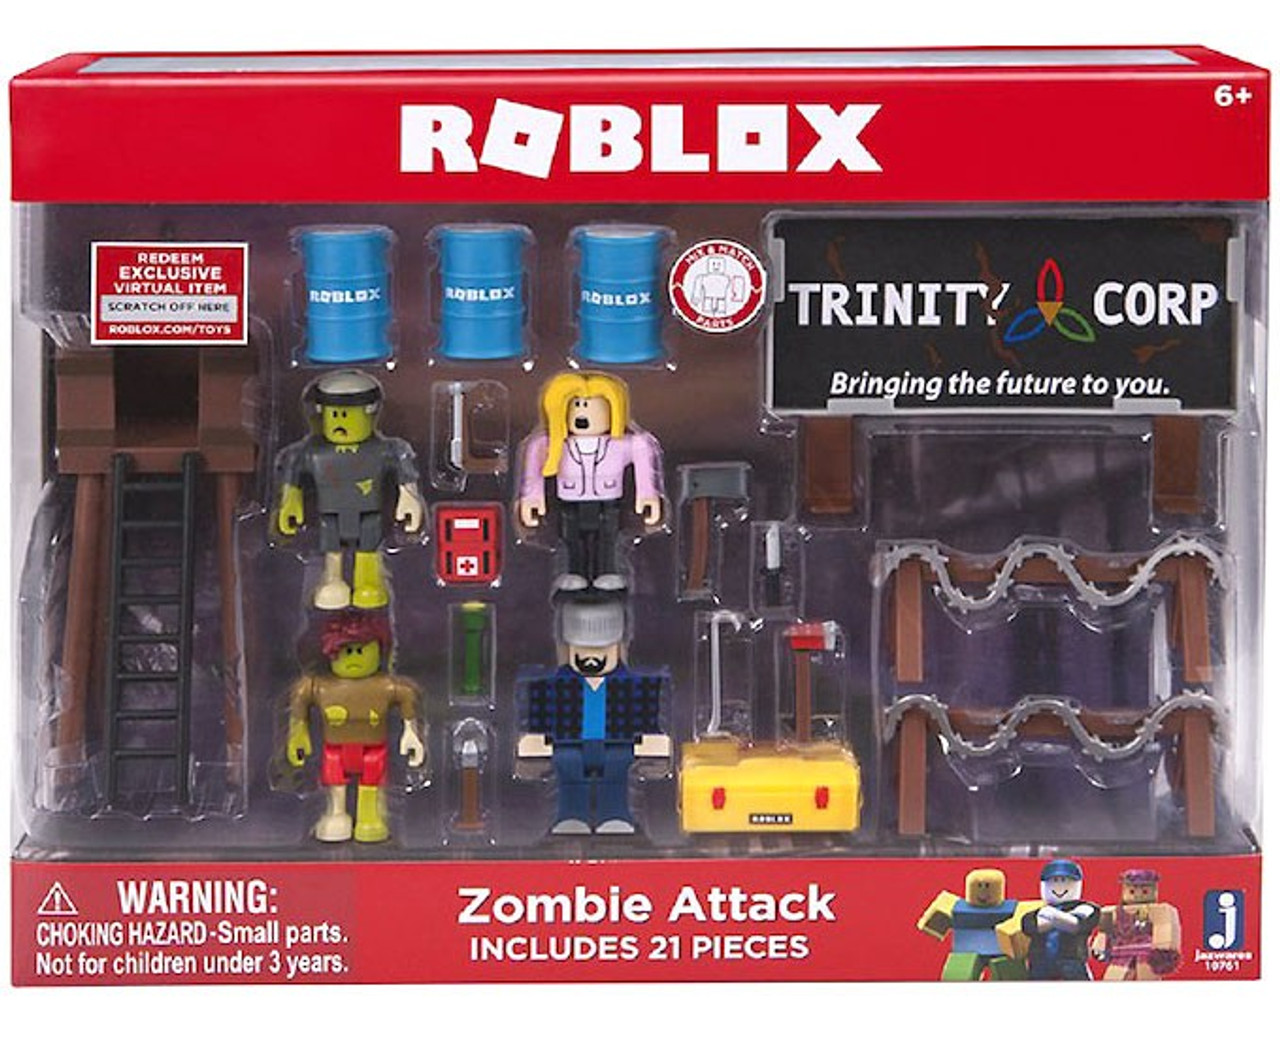 Roblox Zombie Attack 3 Playset Random Box Same Contents Damaged Package Jazwares Toywiz - roblox celebrity sharkbite duck boat vehicle 1525